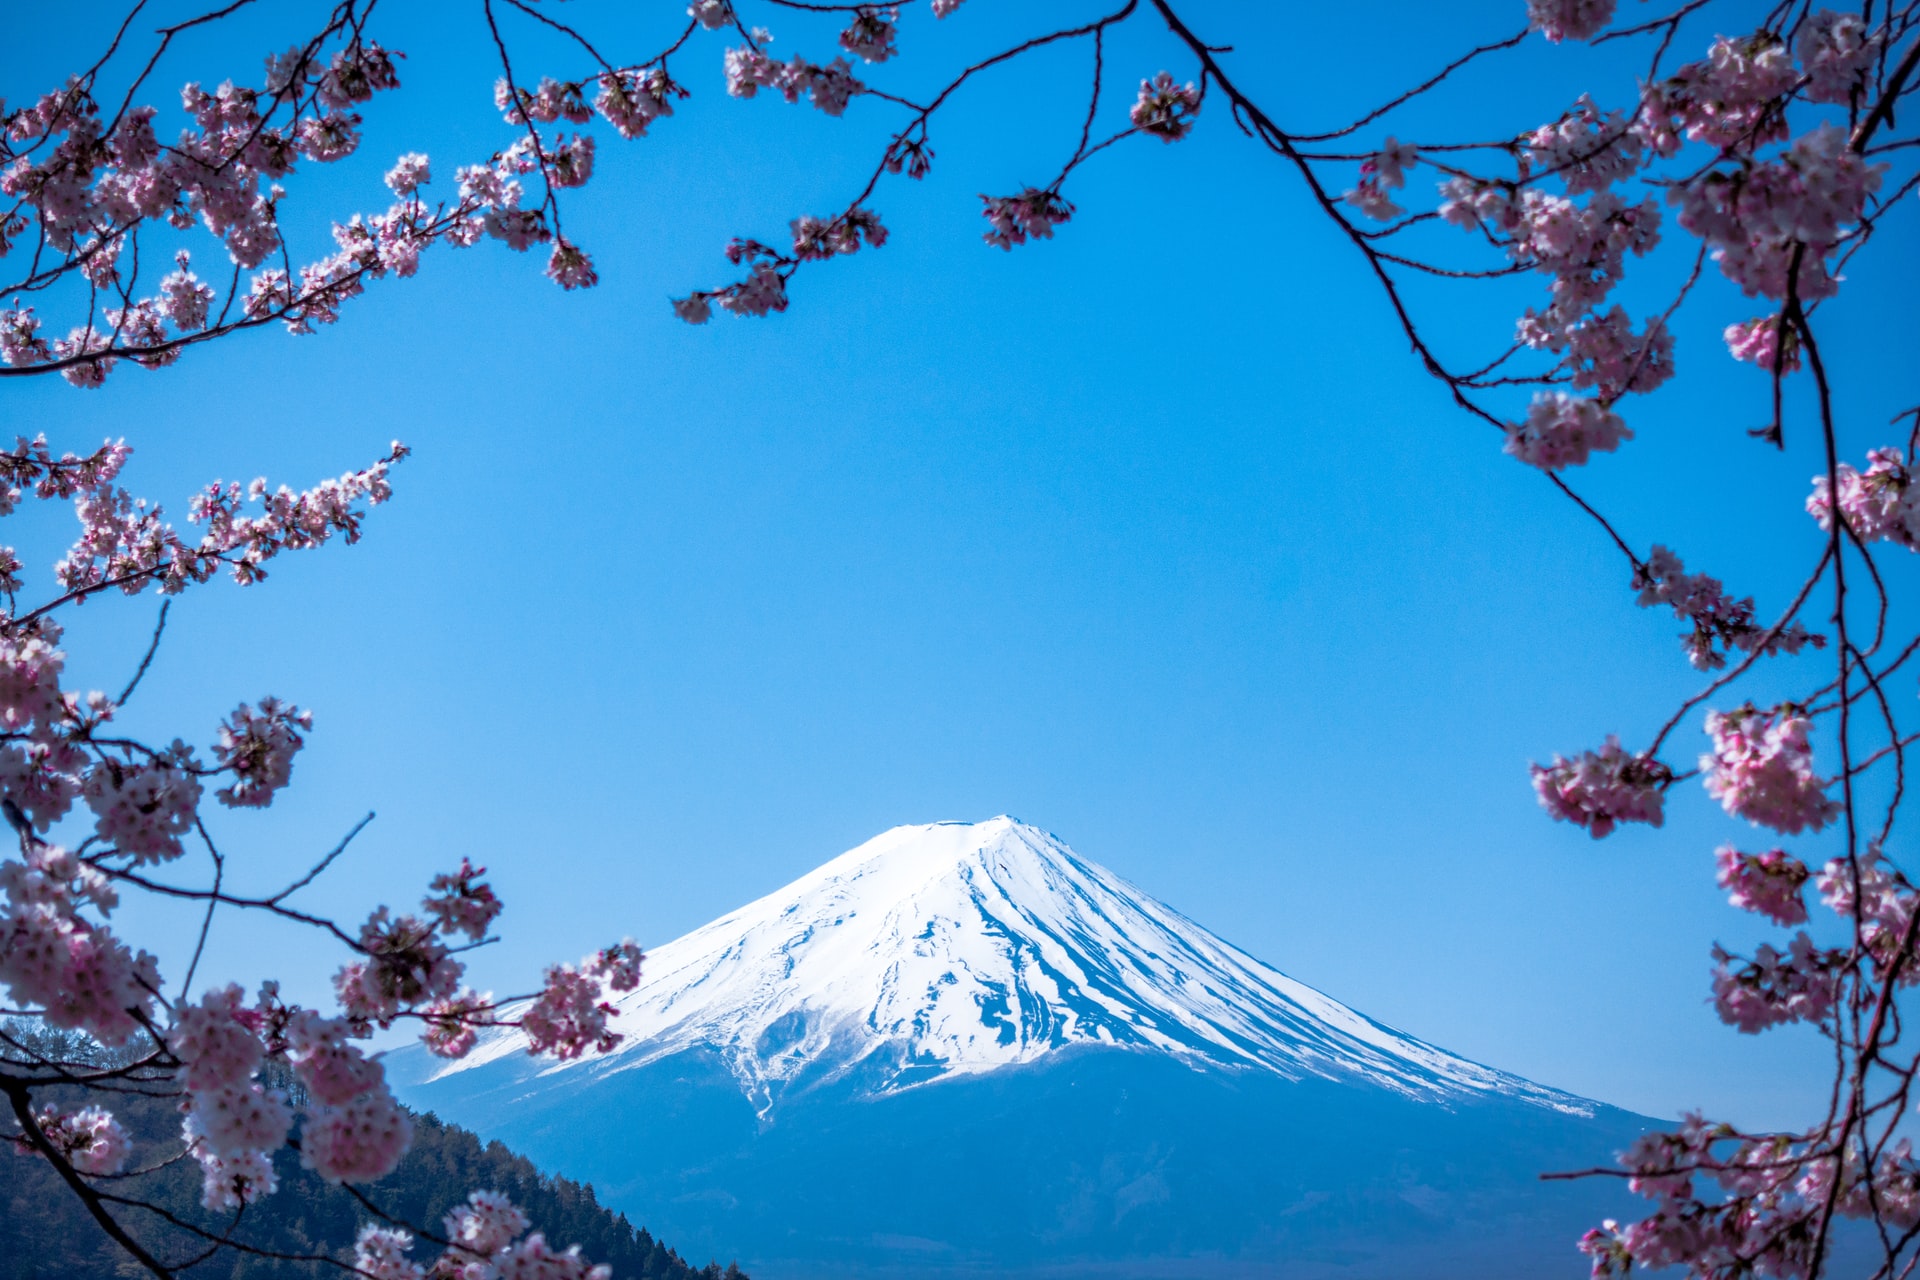 Mt. Fuji, Japan framed by cherry blossoms